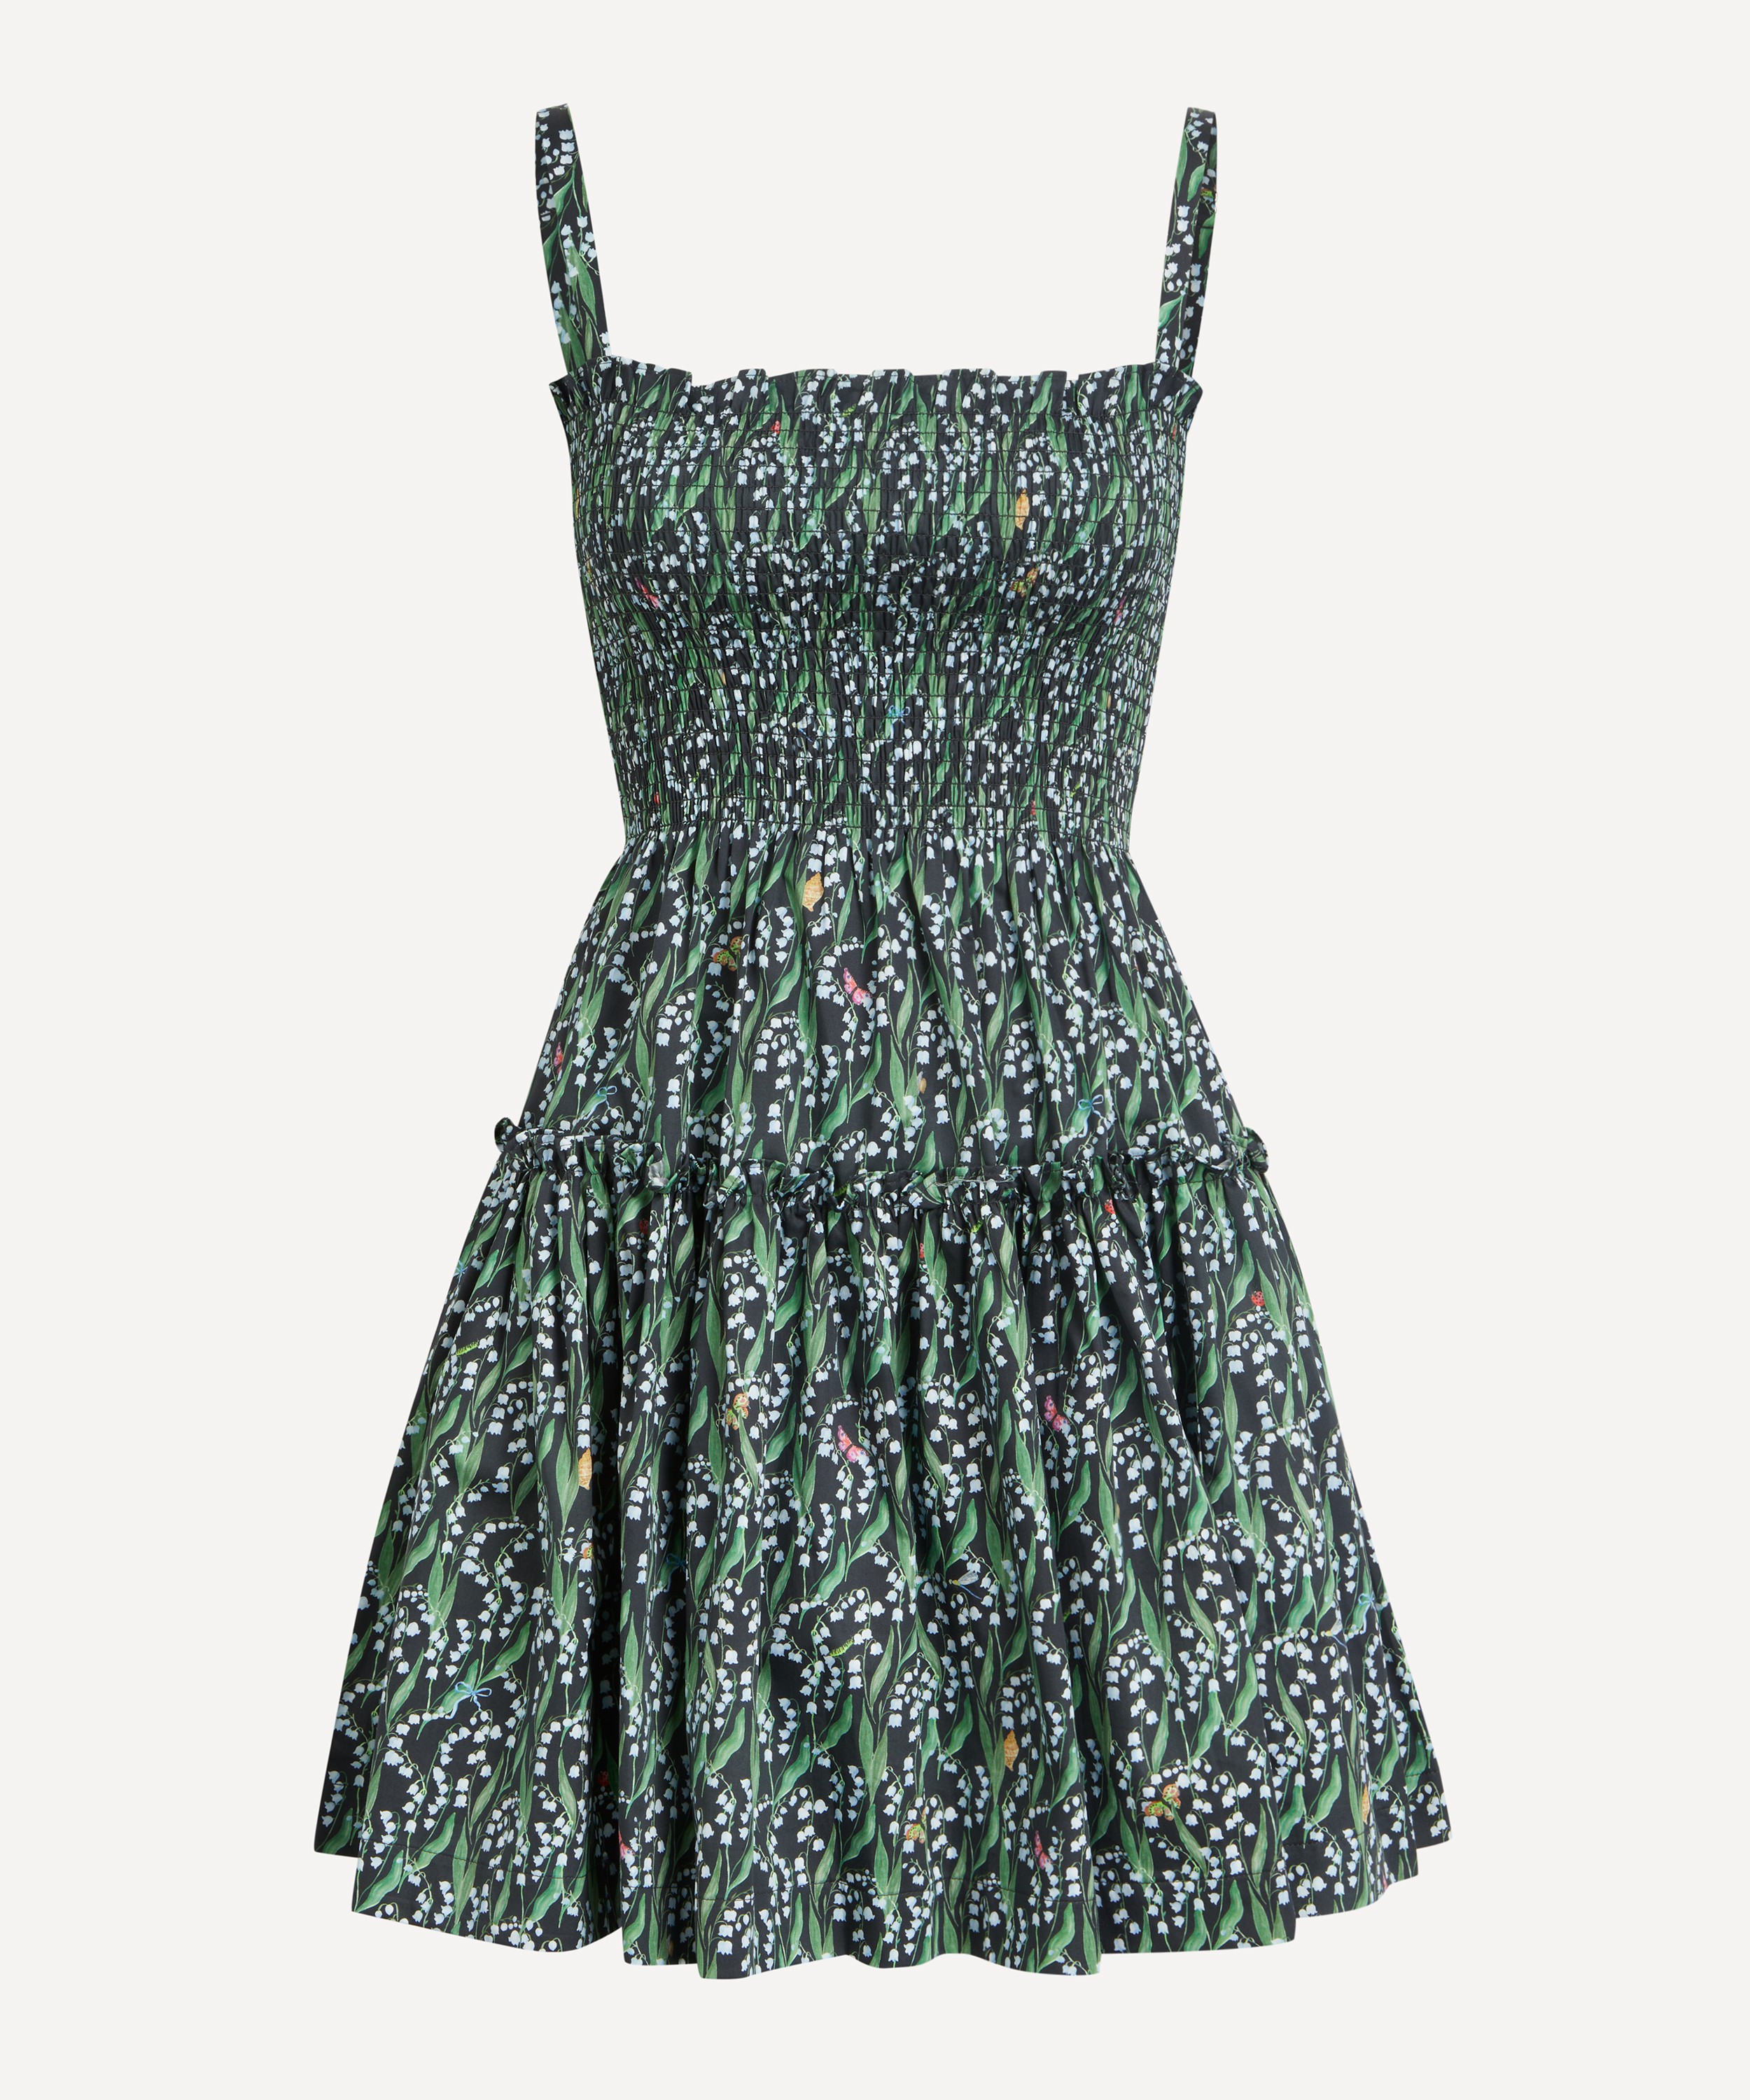 Hill House Home - Mini Seraphina Nap Dress in Black Lily of the Valley